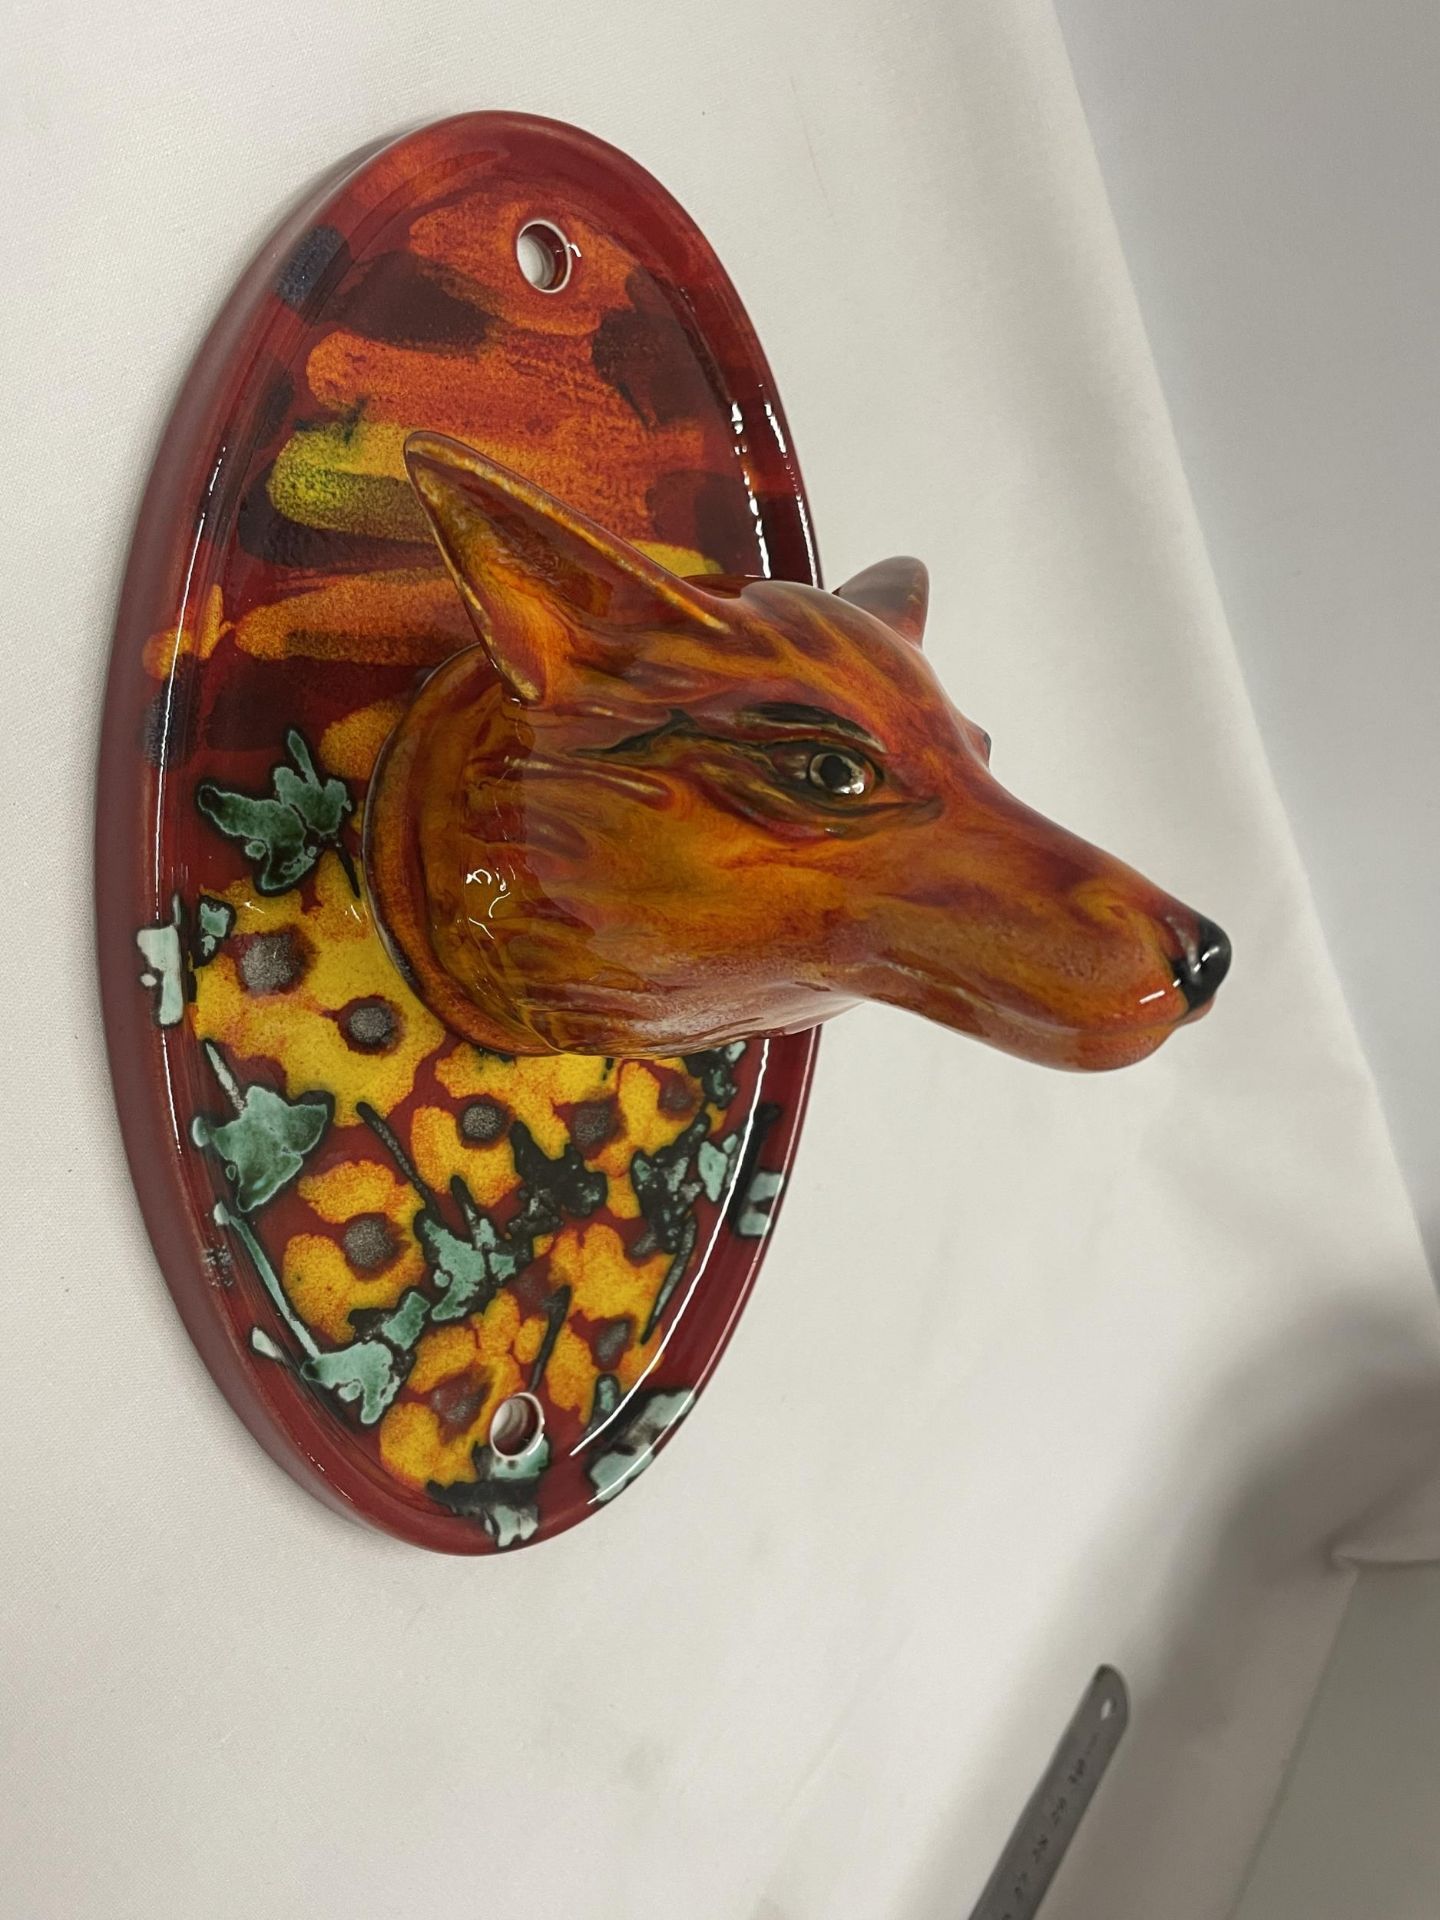 AN ANITA HARRIS HAND PAINTED AND SIGNED IN GOLD FOXES HEAD WALL PLAQUE - Image 2 of 3